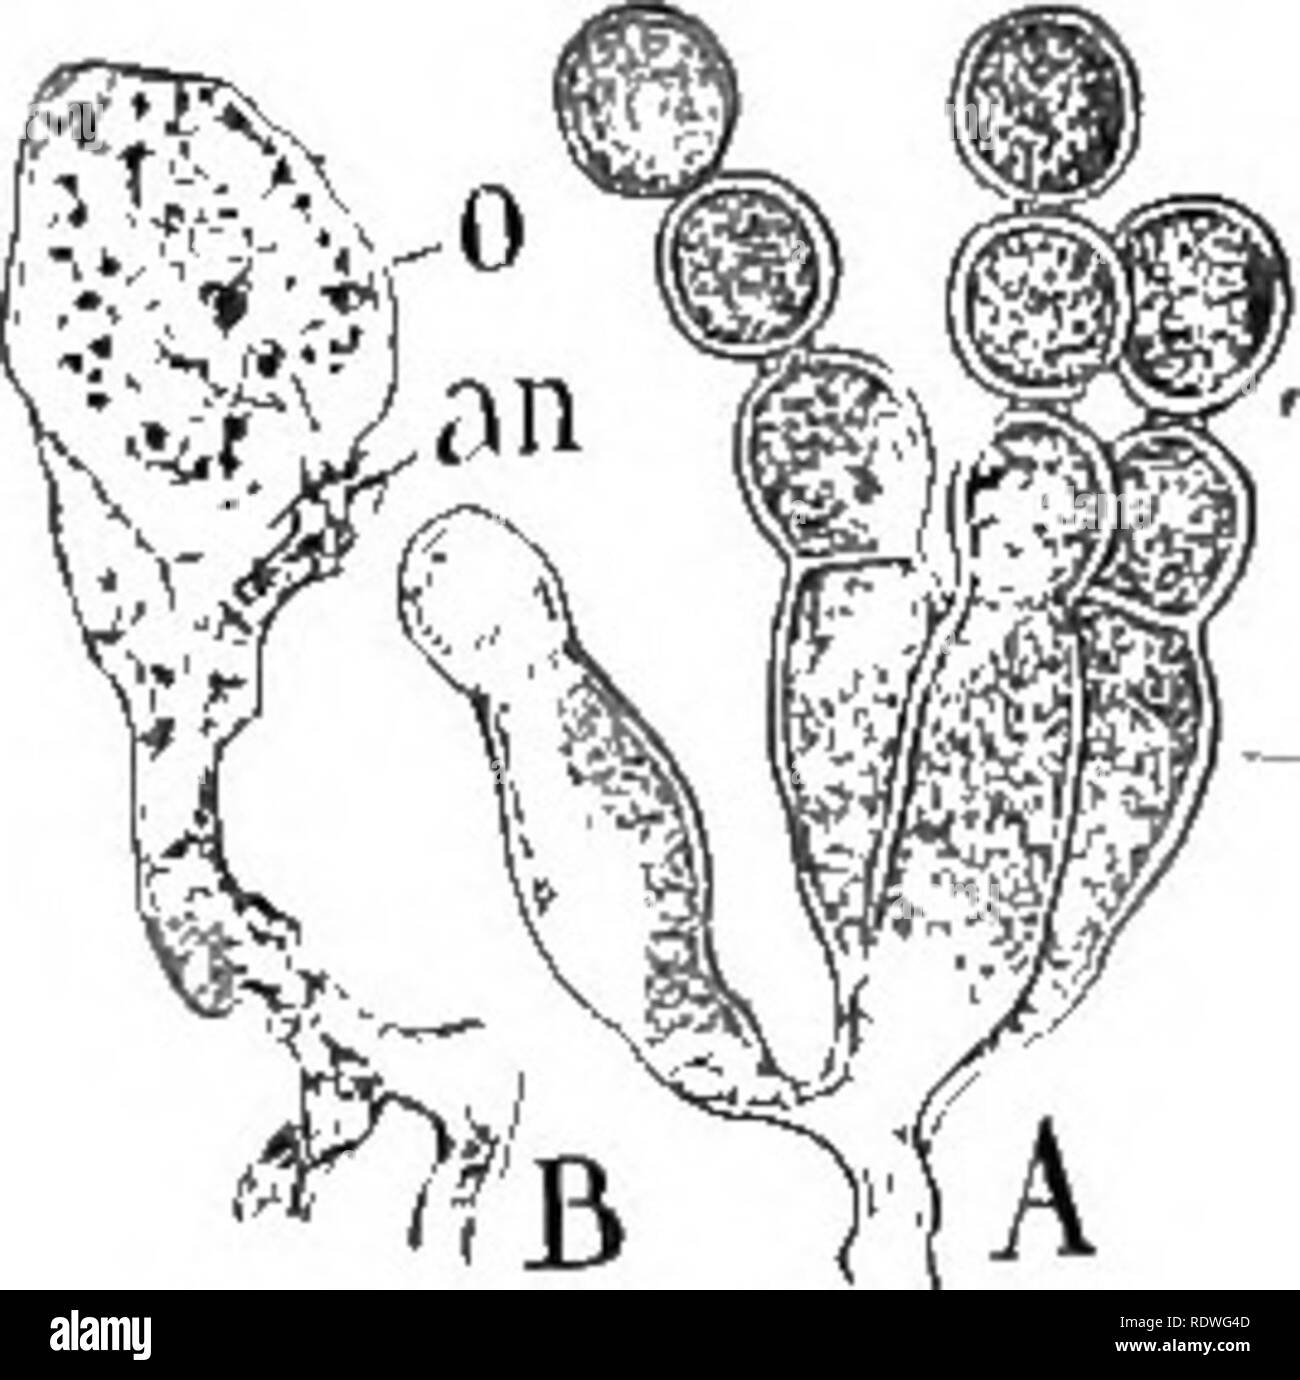 . Nature and development of plants. Botany. Fig. 132. Fig. 133. Fig. 132. Asexual reproduction of the mildew: A, hyphae of Plasmo- para emerging from a stoma and bearing numerous sporangia. B, enlarged view of sporangium of Peronospora germinating on a dry leaf. In this case the sporangium behaves as a spore sending out a hypha that will penetrate the tissues of the leaf. C, sporangium of Phytophthora germinating in the water and forming zoospores. D, zoospore enlarged. E, zoospore has come to rest and is forming a tube that will penetrate the tissues of the leaf as in the case of 5. Fig. 133. Stock Photo